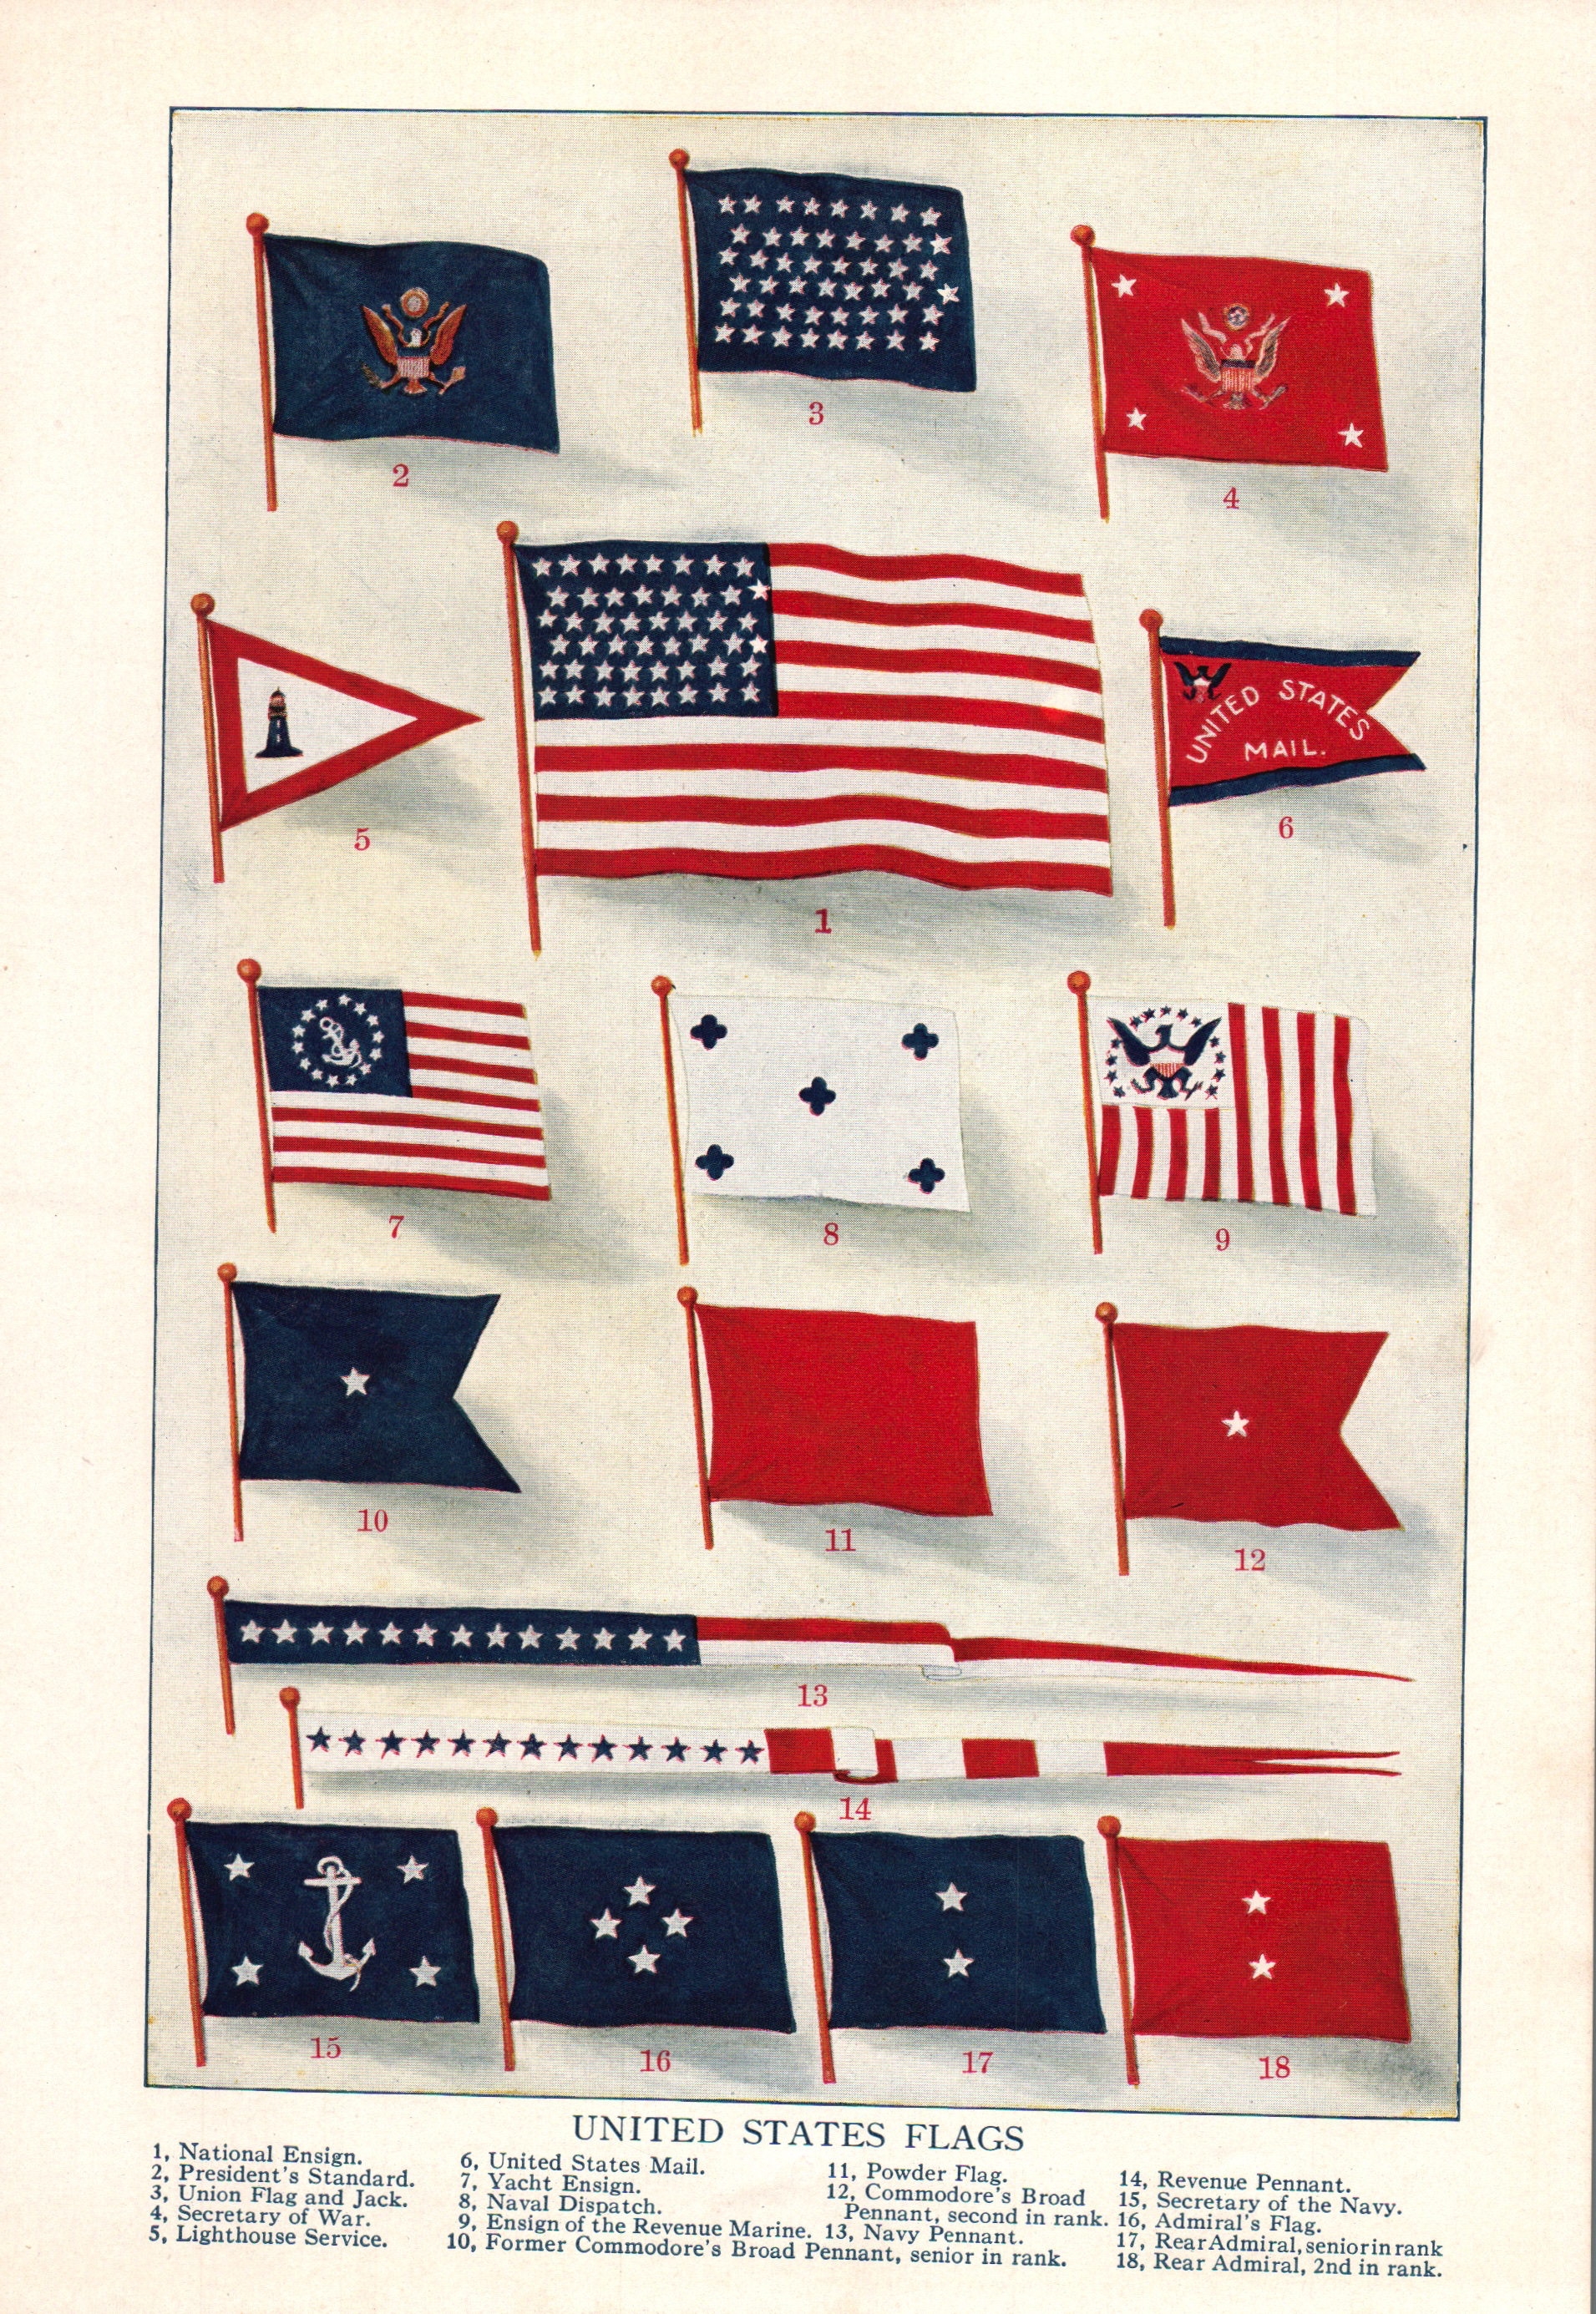 1937 Flags of the United States